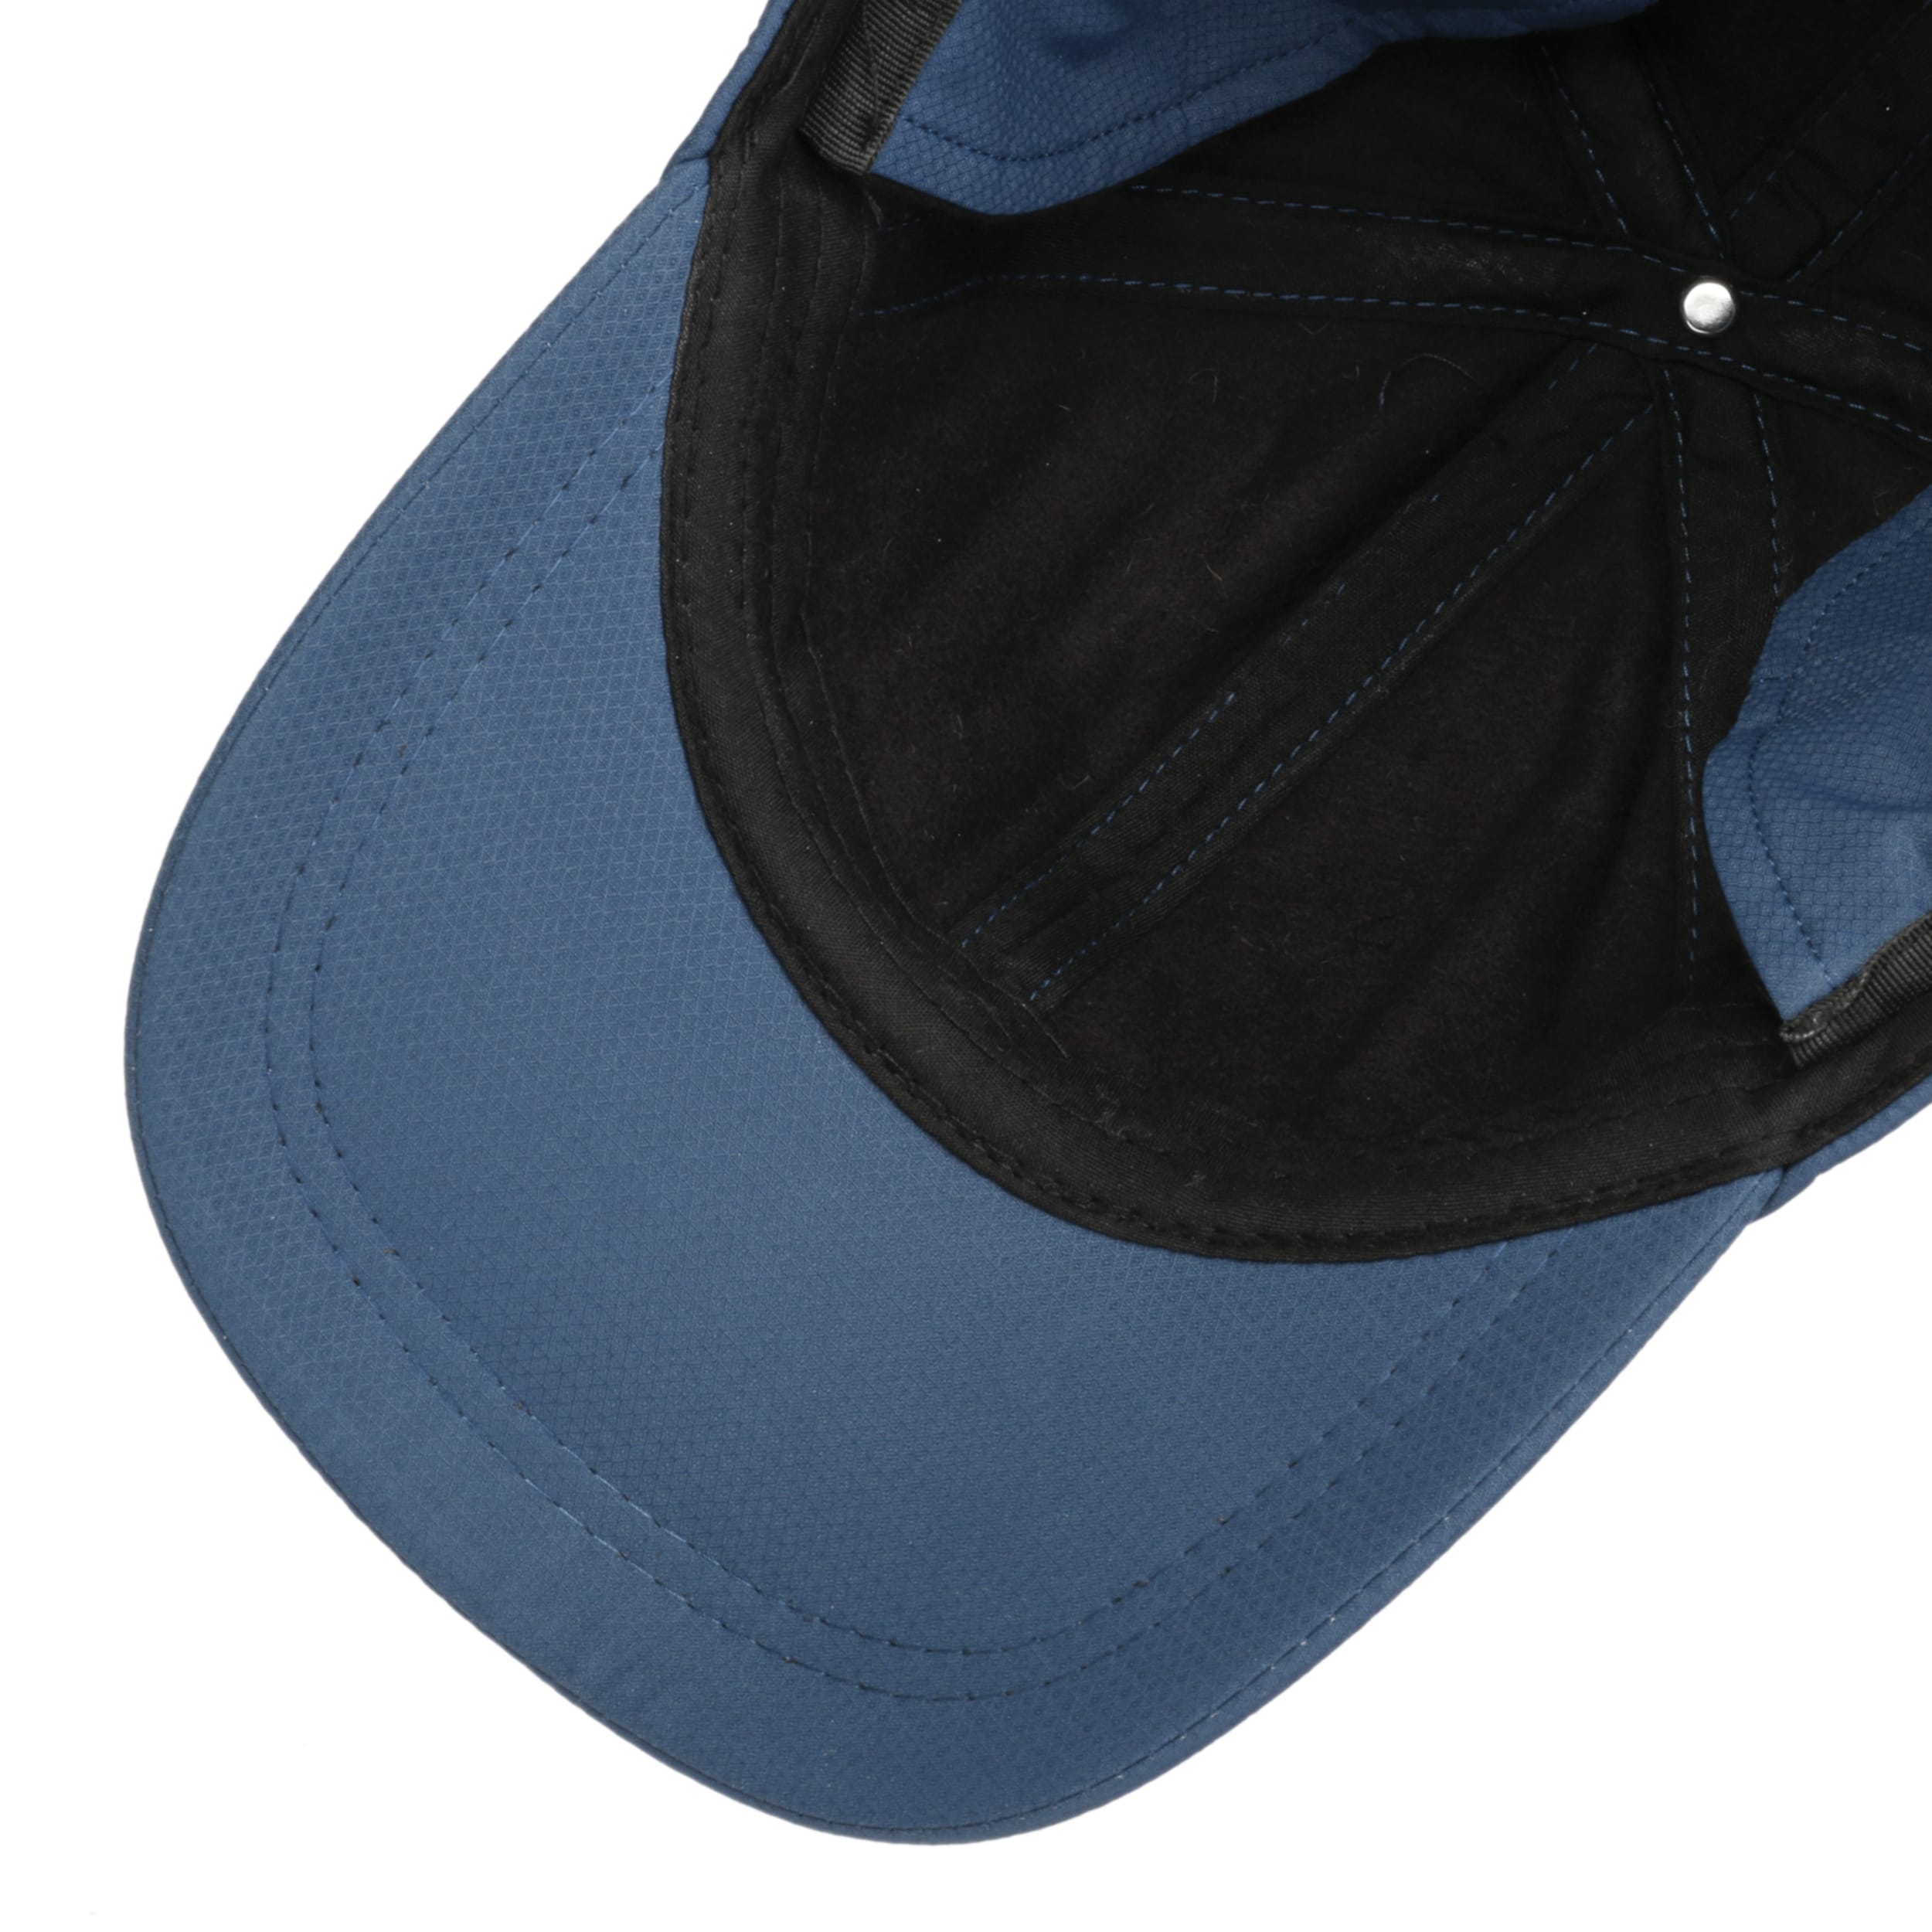 3M Thinsulate Cap mit 29,95 by Ohrenklappen Lipodo € 